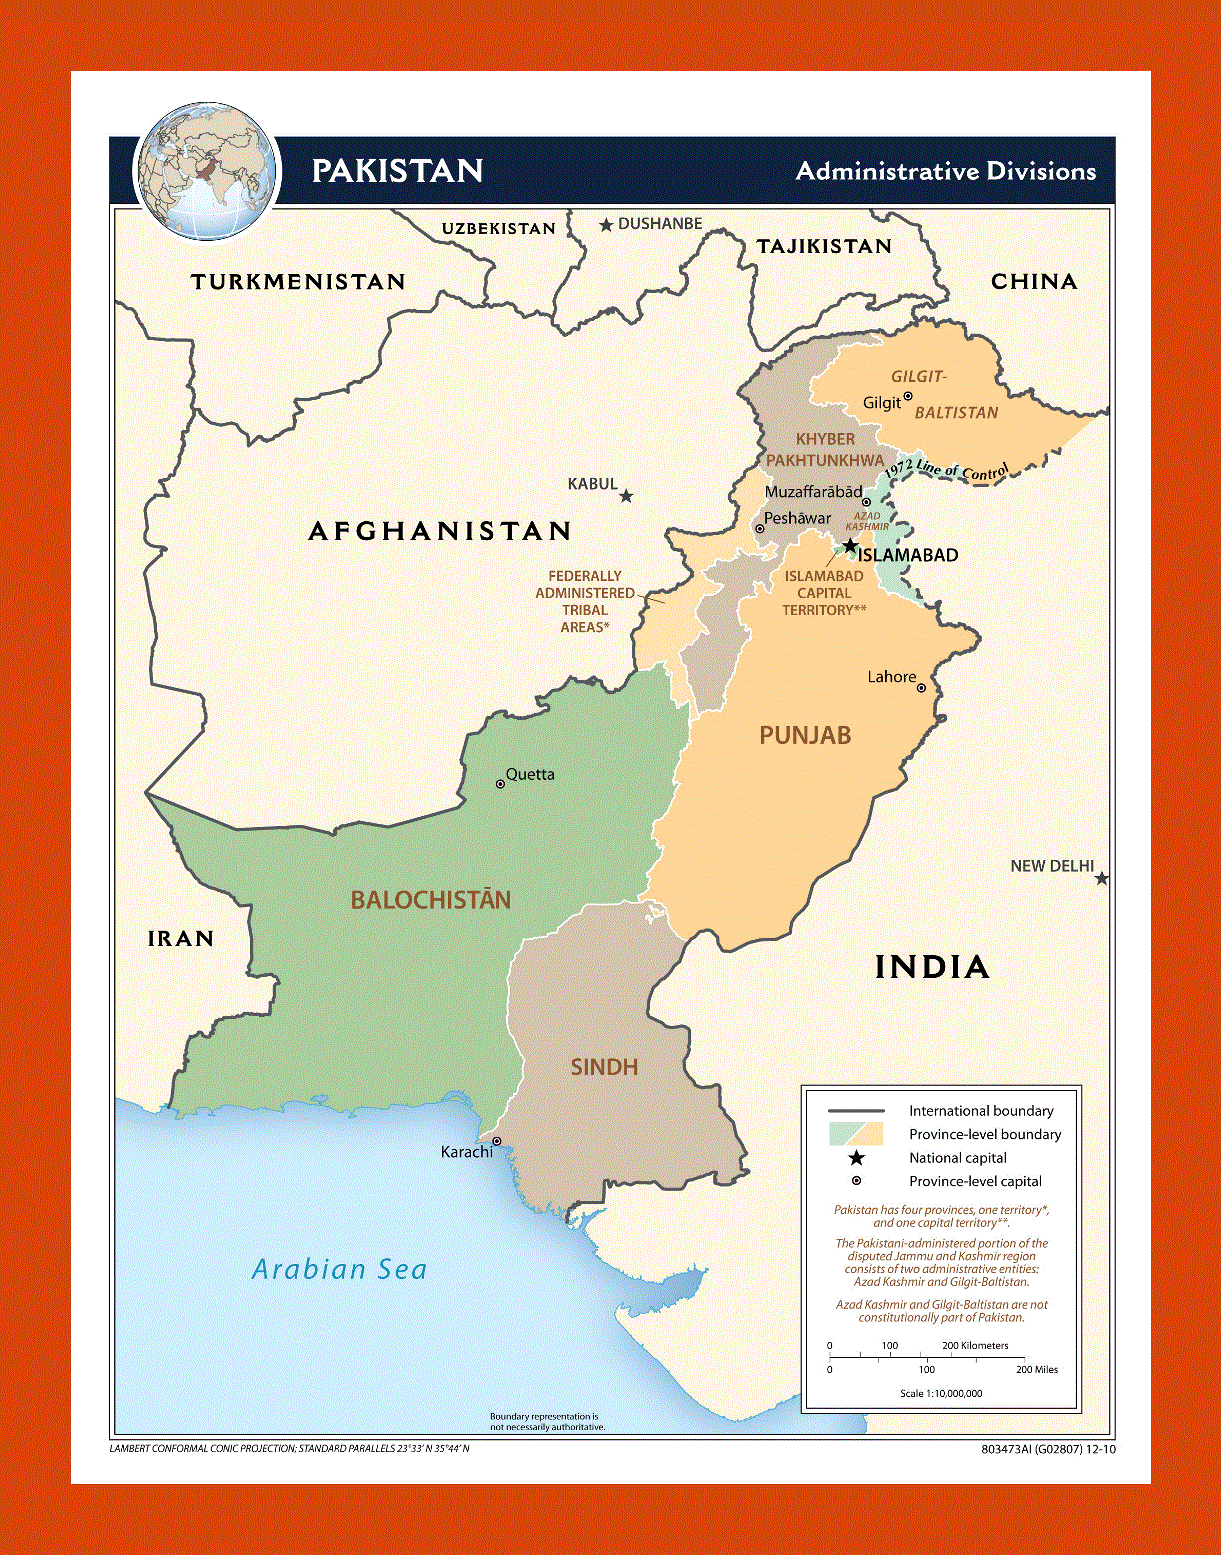 Administrative divisions map of Pakistan - 2010